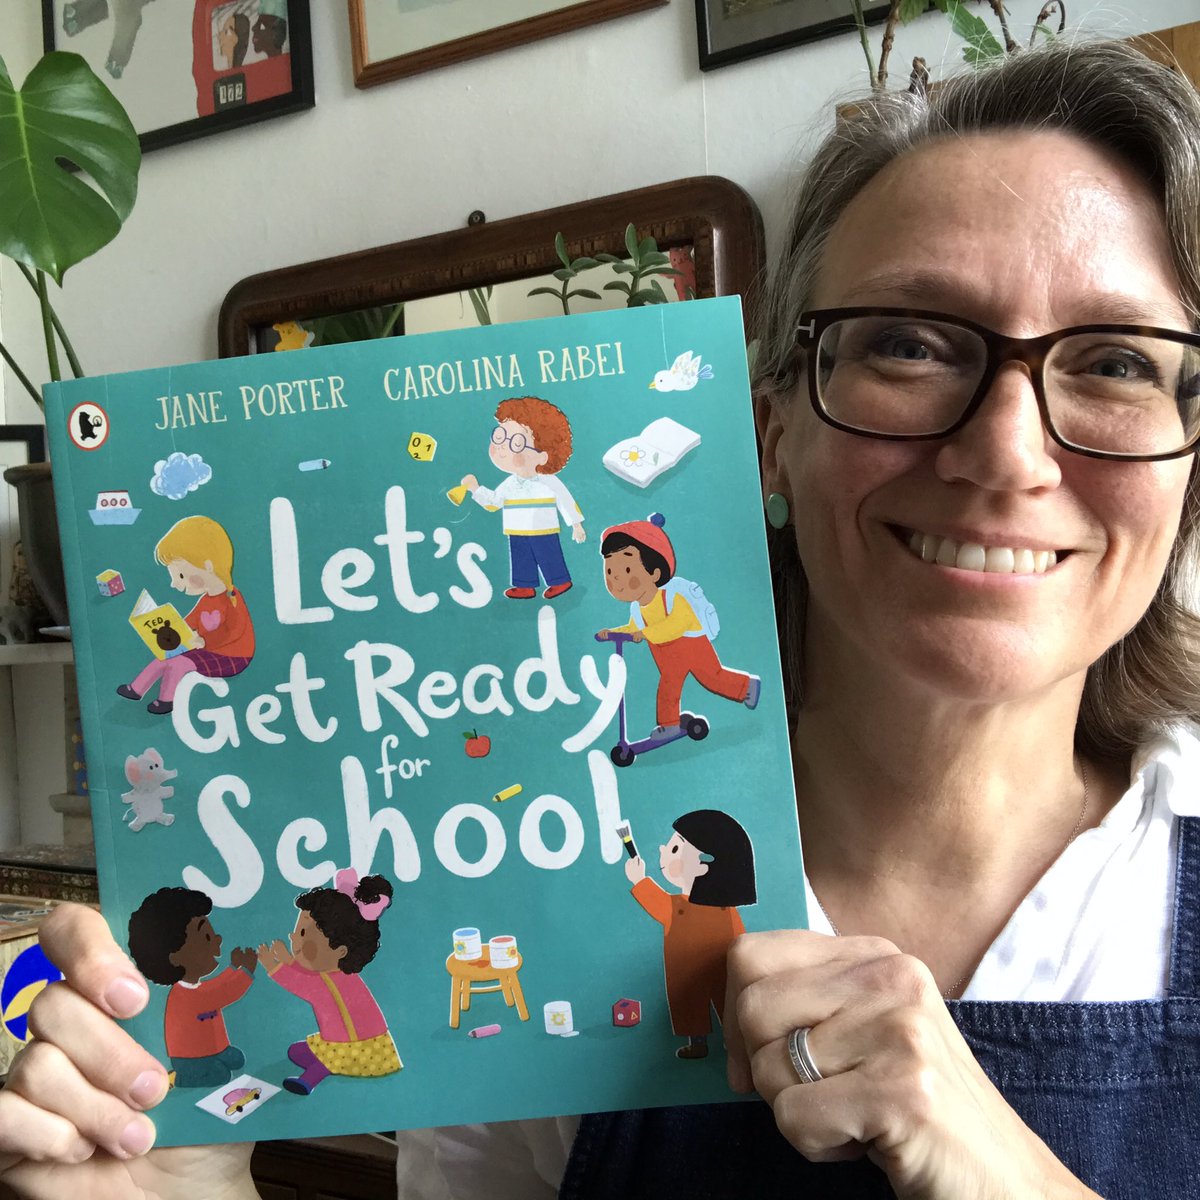 I got the @uksla longlisting news and the paperback edition at the same time! #LetsGetReadyForSchool by me and @CarolinaRabei is out in paperback with @BIGPictureBooks on August 4th. I hope it will help lots of children approach school feeling calm and optimistic.